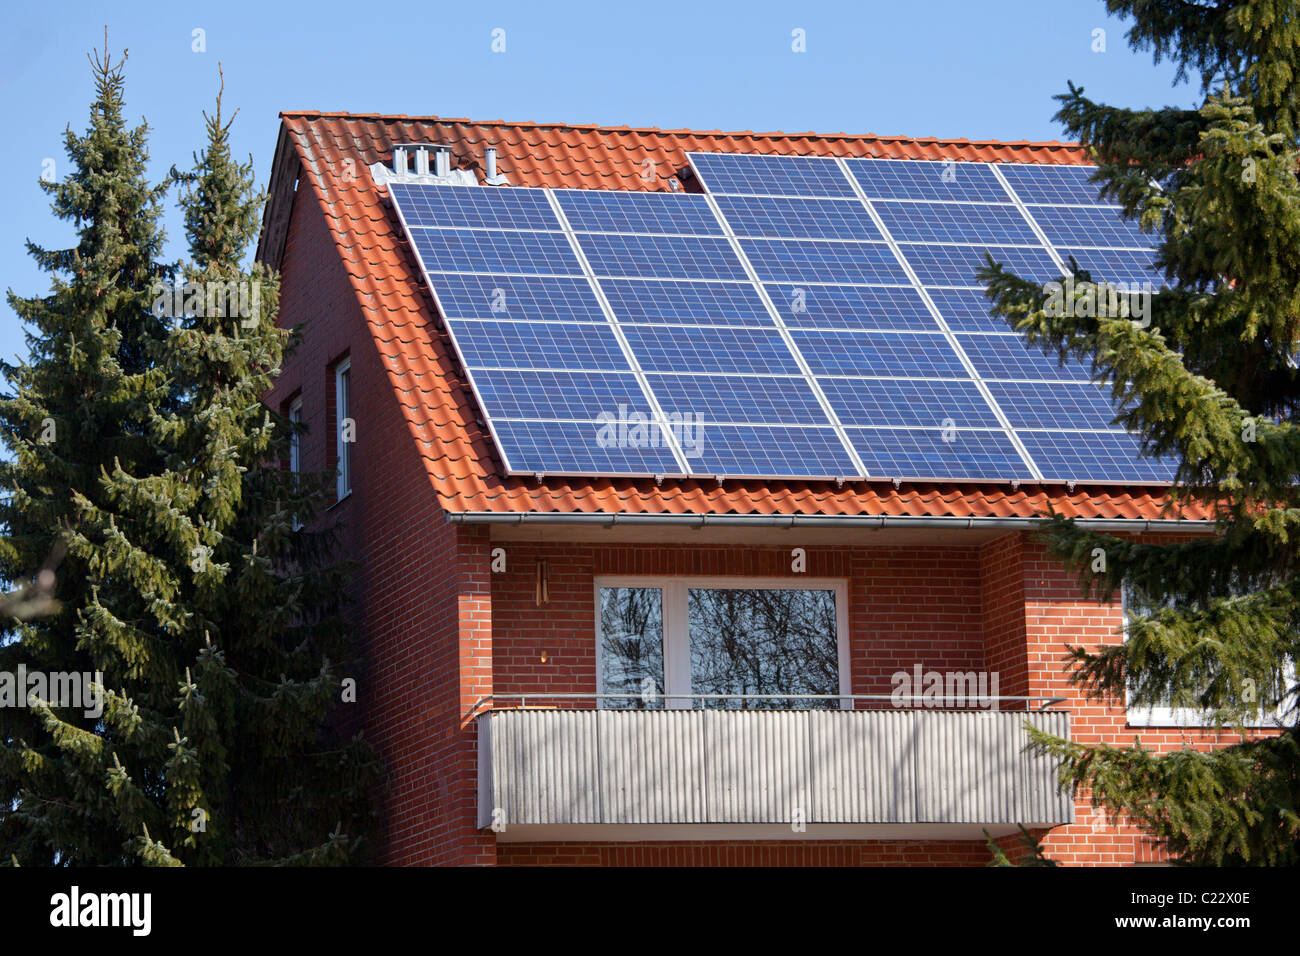 photovoltaics on a house roof, Lower Saxony, Germany Stock Photo